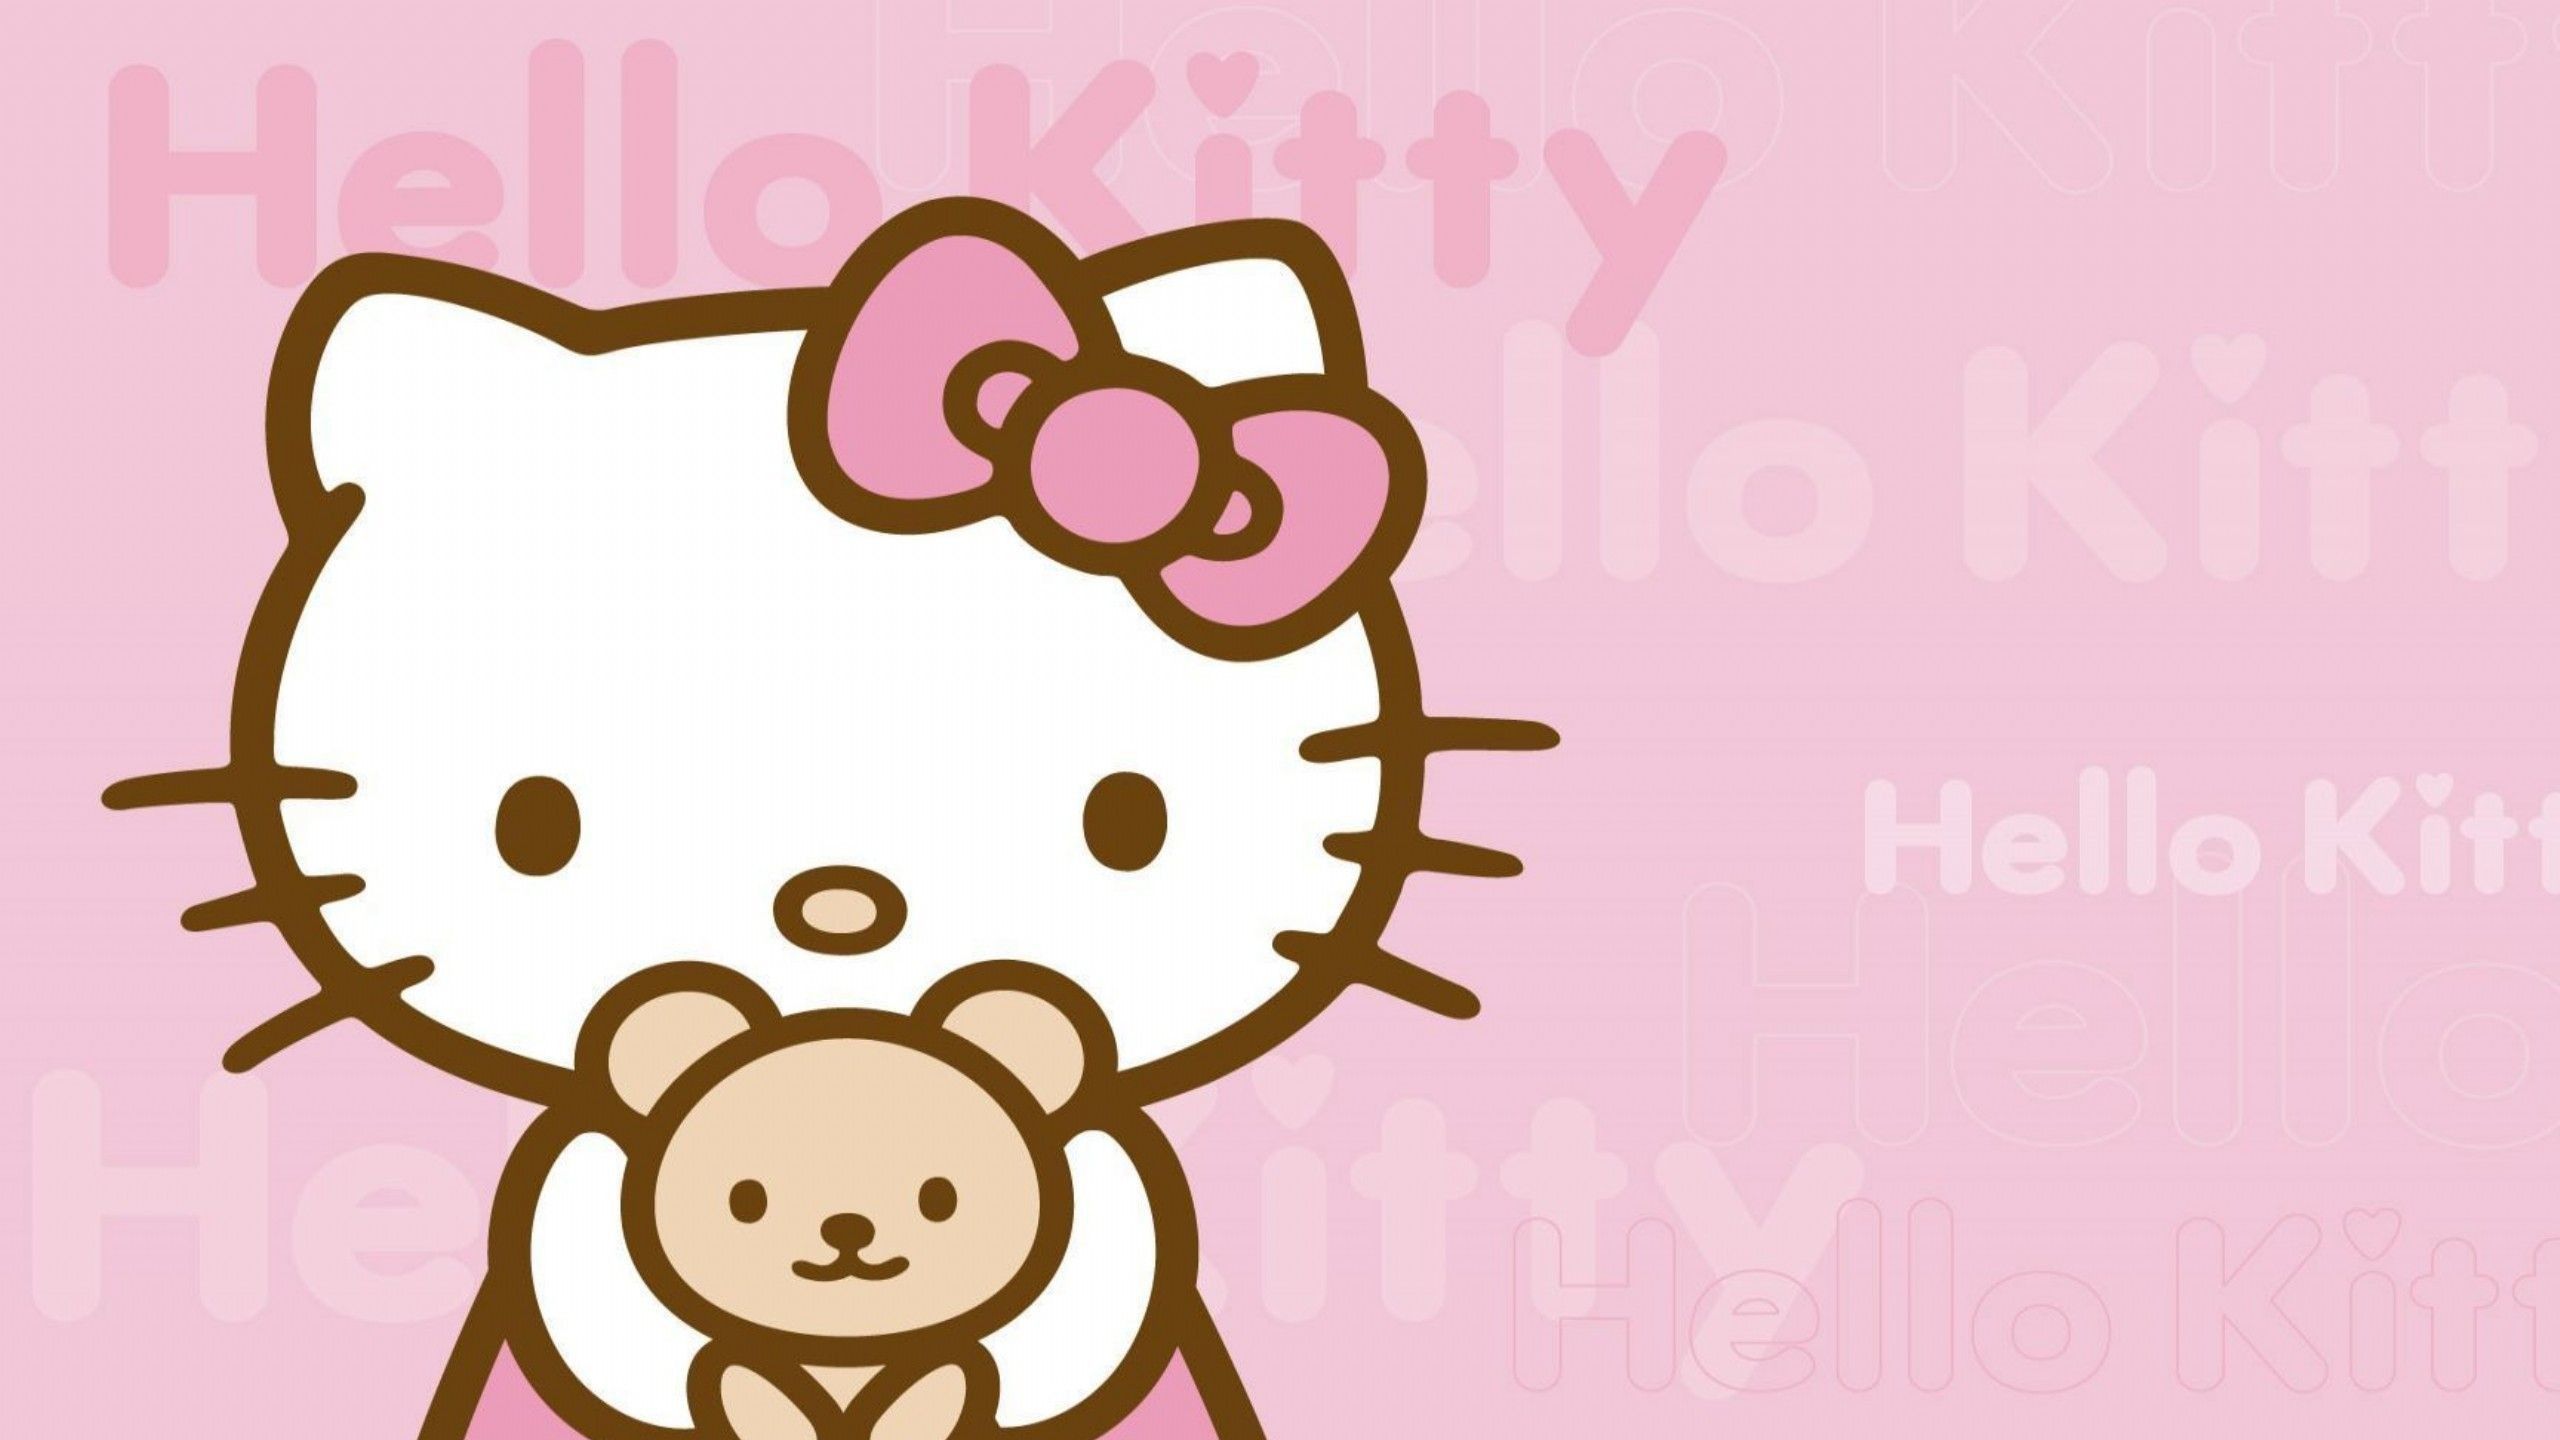 Free download Hello Kitty Wallpaper 2015 [2560x1440] for your Desktop, Mobile & Tablet. Explore Hello Kitty 2015 Wallpaper. Hello Kitty Background, Background Hello Kitty, Hello Kitty Background